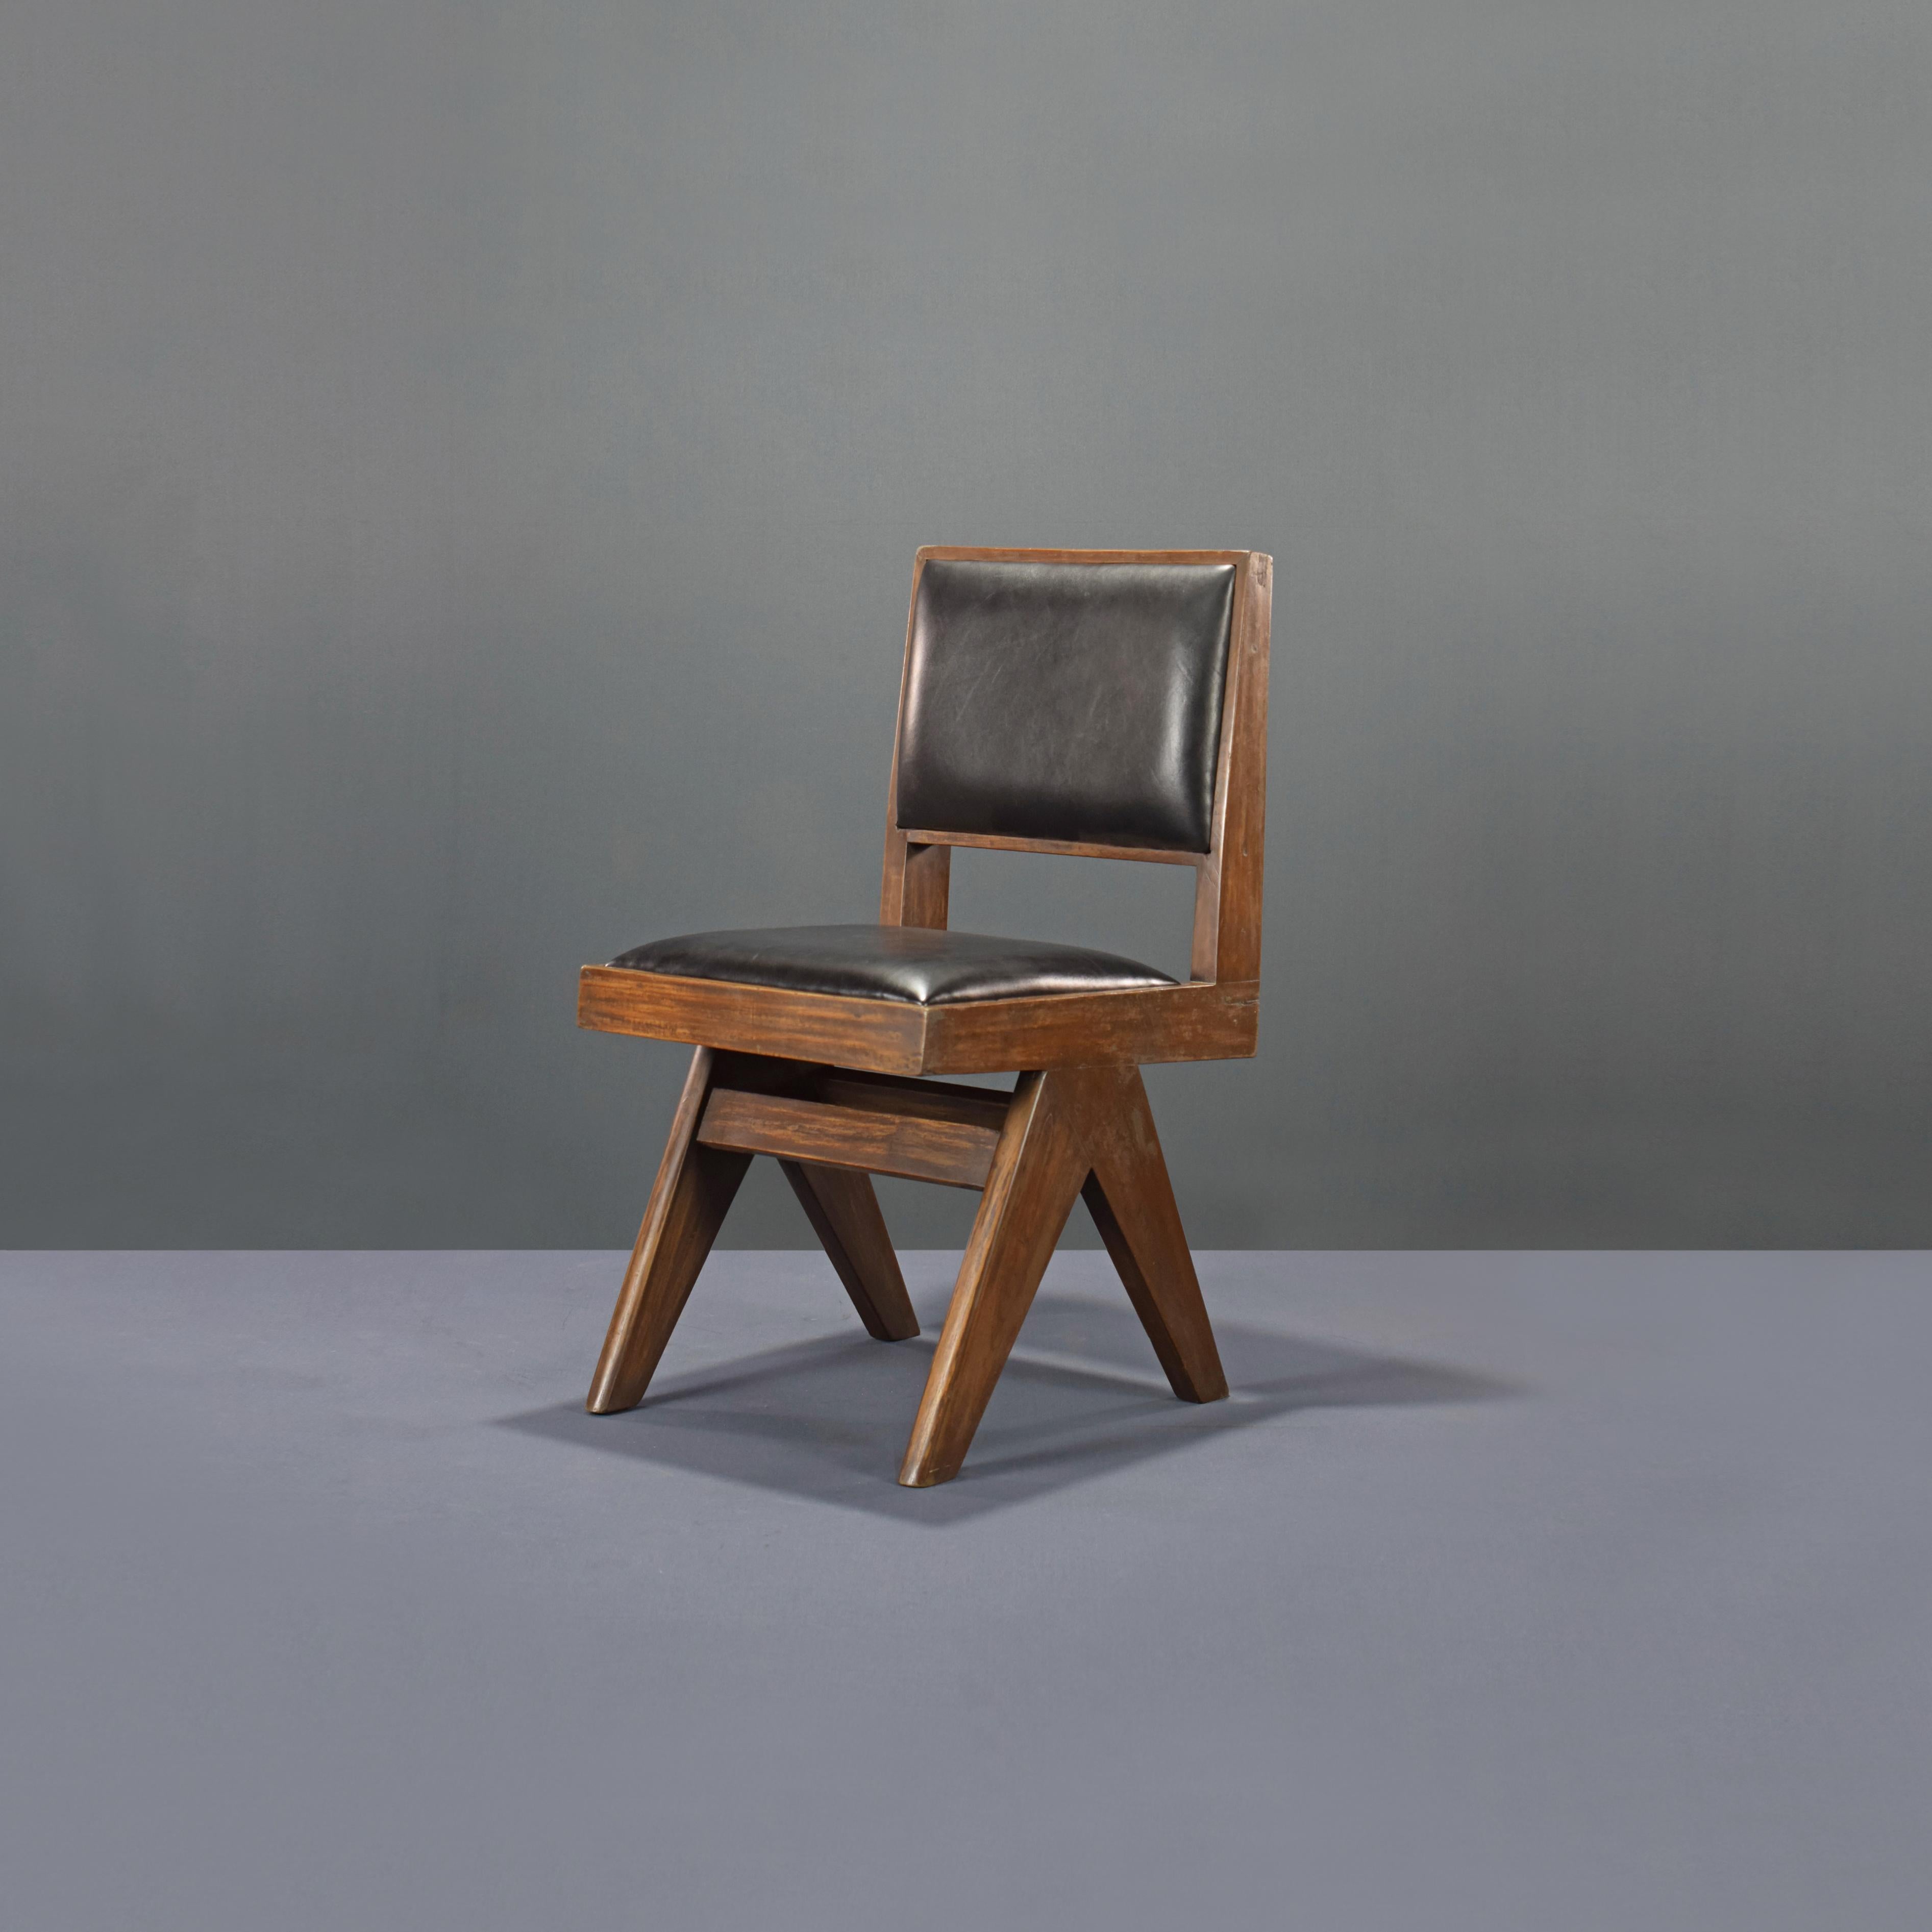 This chair is a fantastic piece, finally it's iconic. It appears so simple and yet so precise, where proportions seems to be perfect. This A-shaped legs are typical for Chandigarh objects. Then this L-shaped seat, where the beams get at the ends